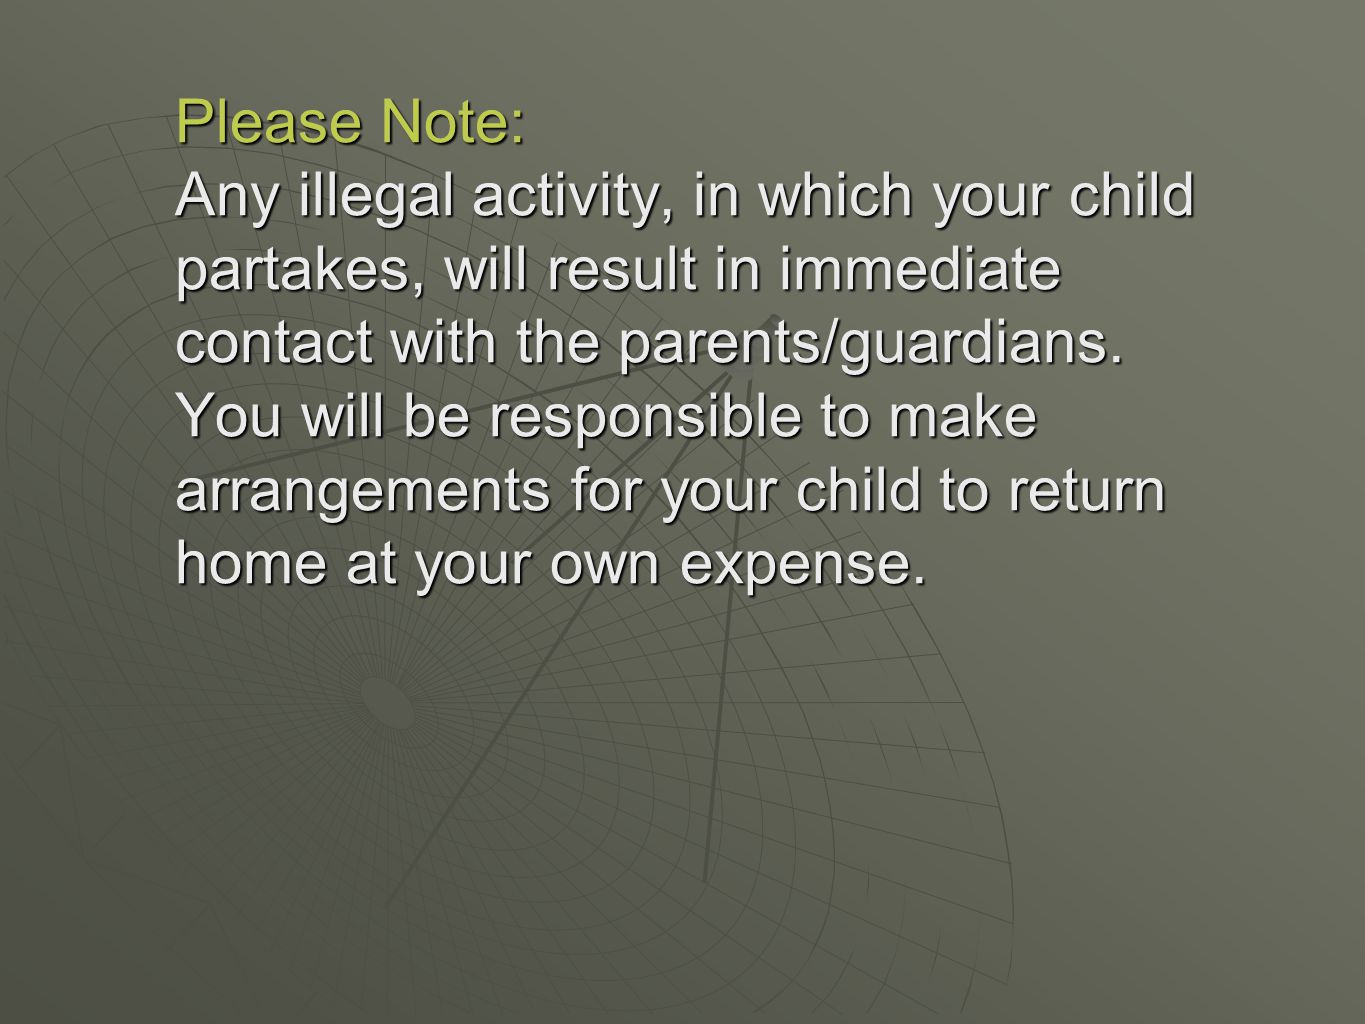 Please Note: Any illegal activity, in which your child partakes, will result in immediate contact with the parents/guardians.